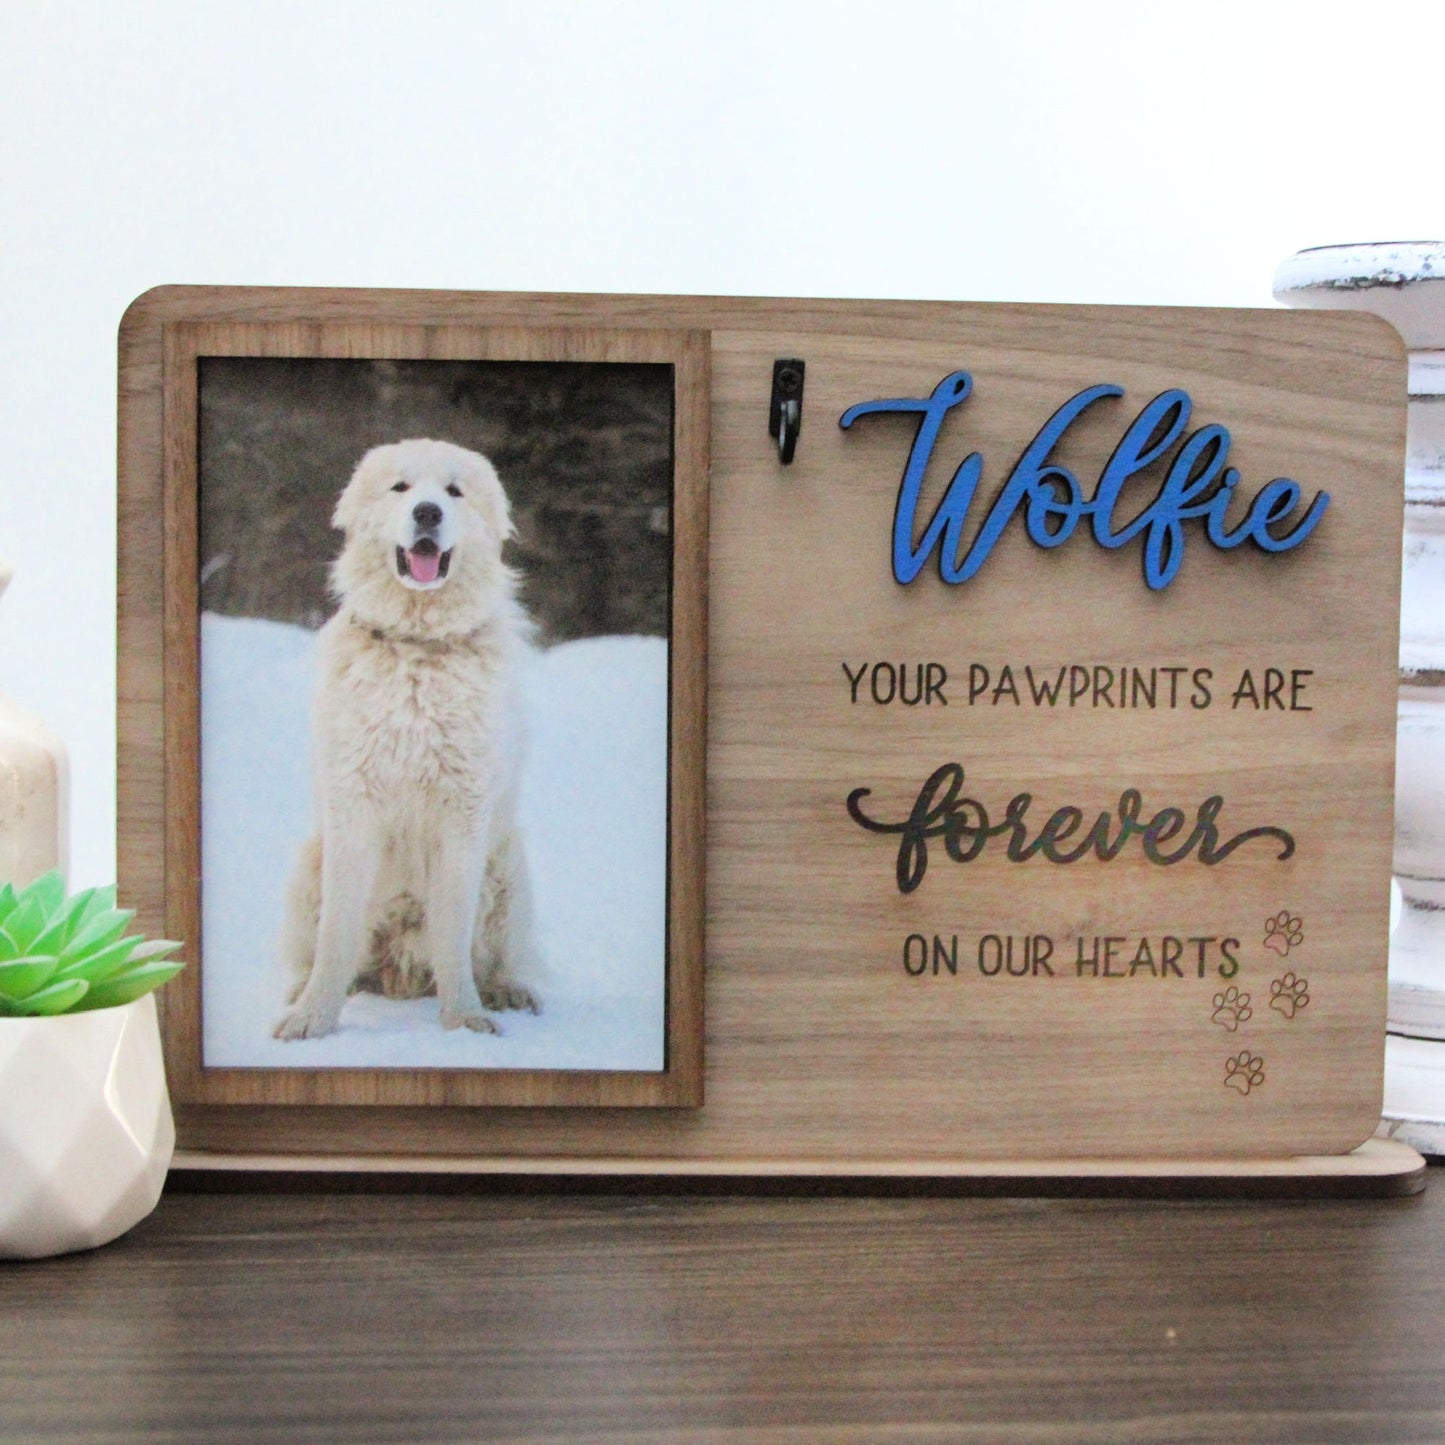 Pawprints on our Hearts Pet Loss Frame